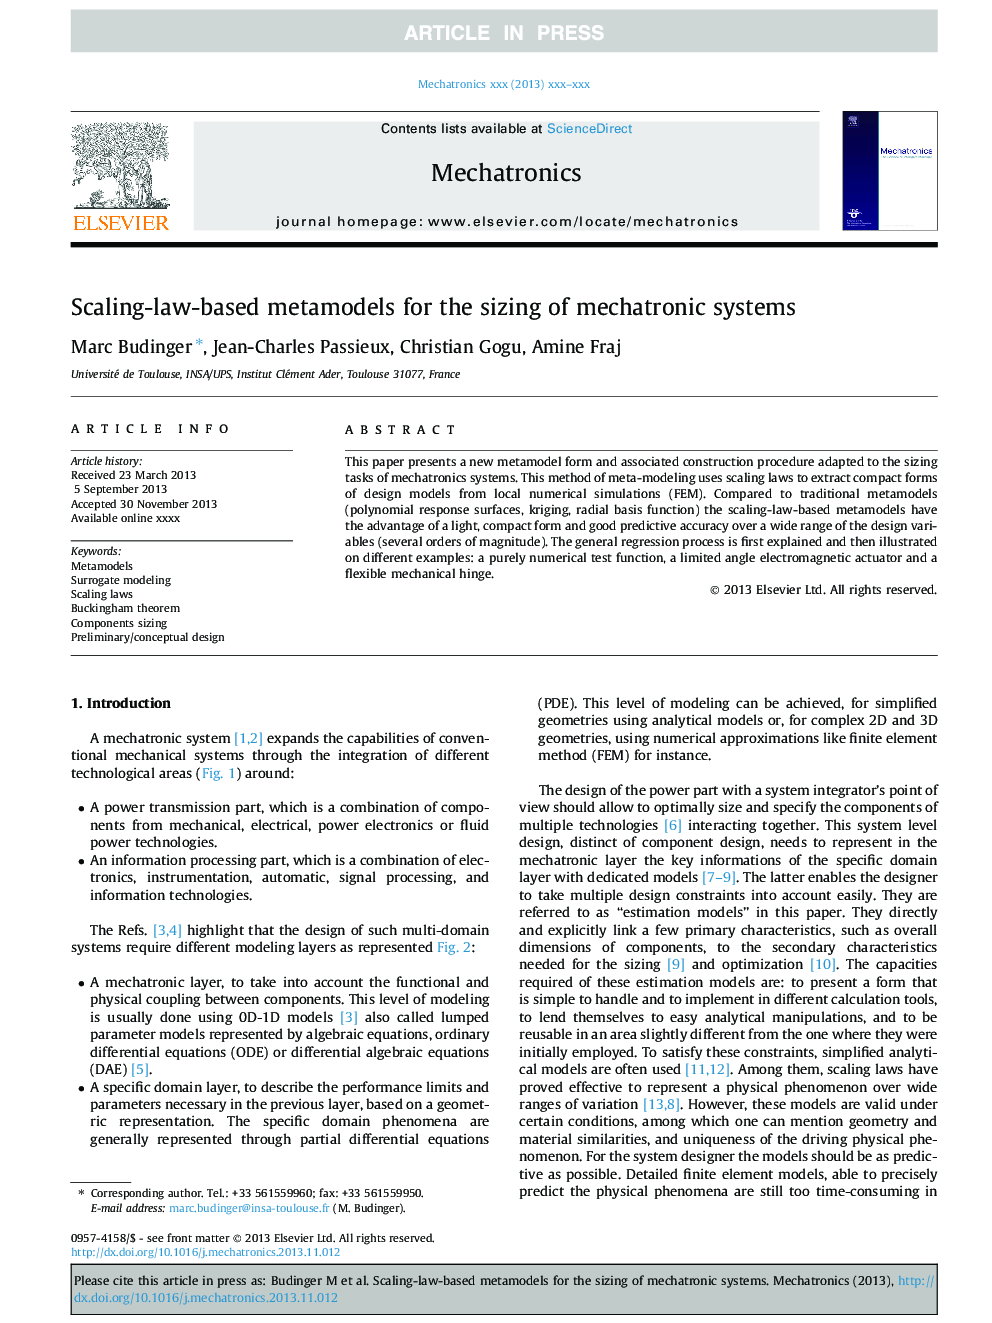 Scaling-law-based metamodels for the sizing of mechatronic systems